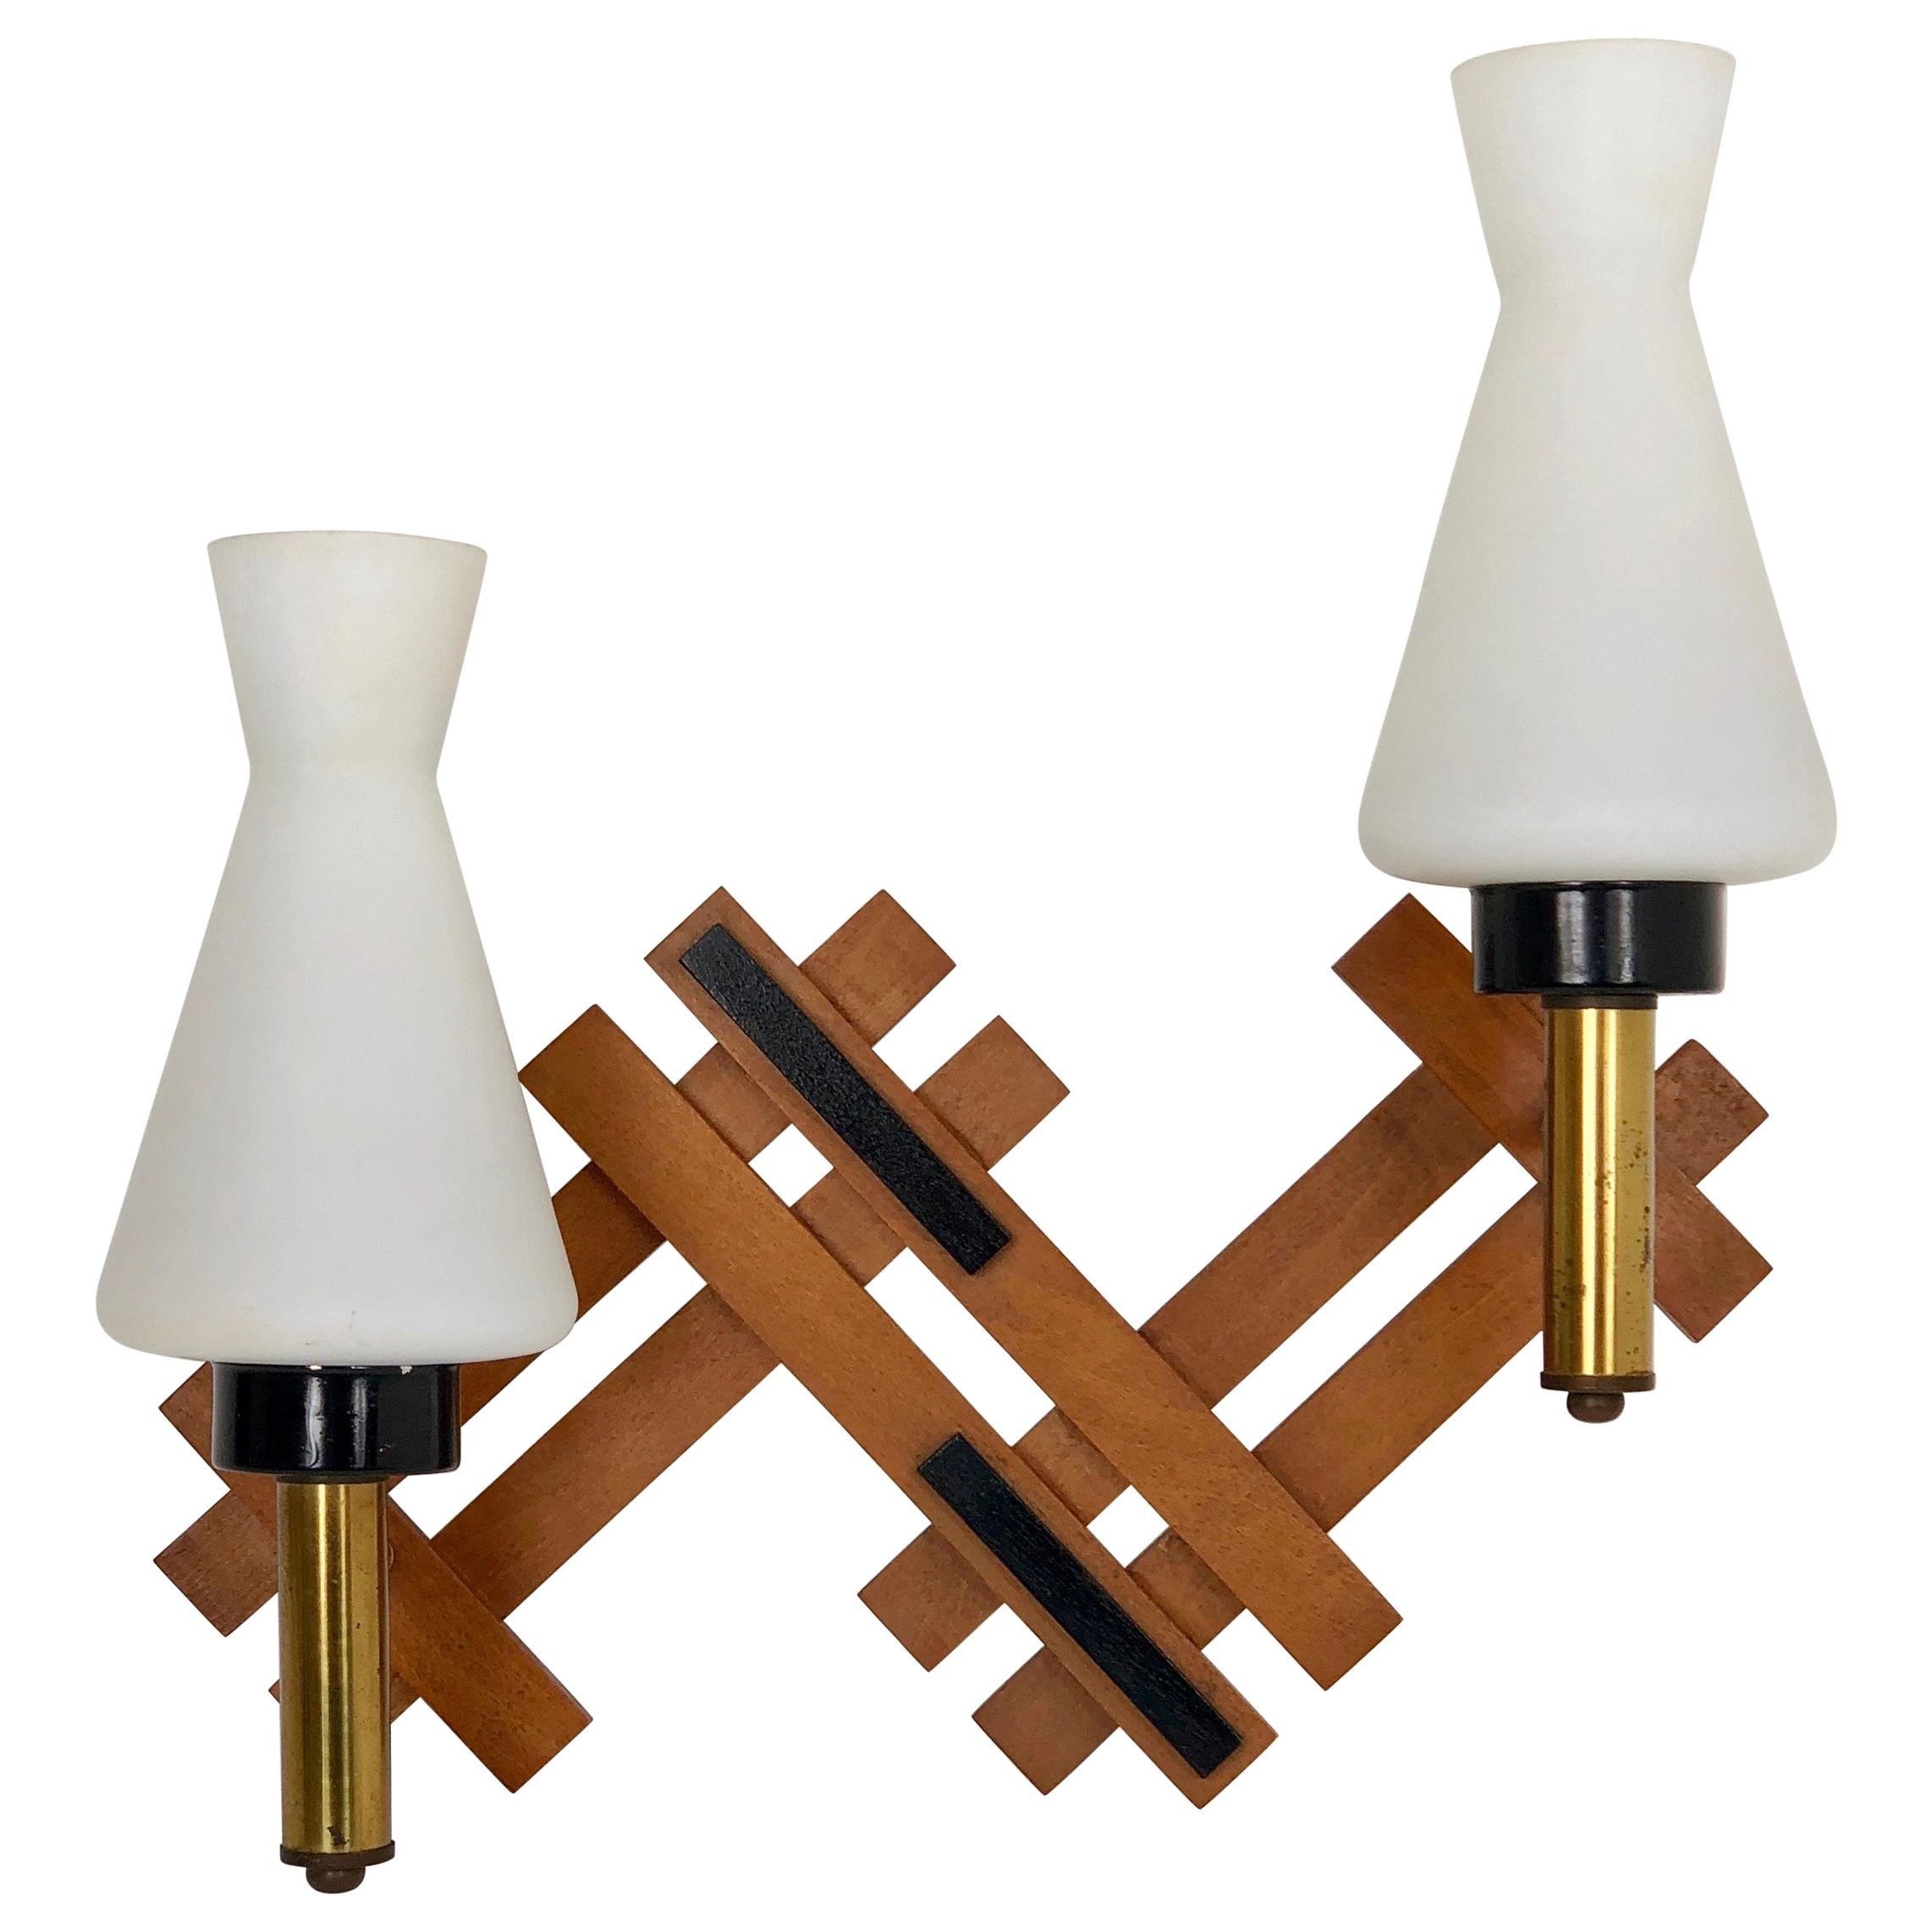 Teak, Brass and Opaline Glass Wall Sconces, 1960s Italy Vintage Two Lights